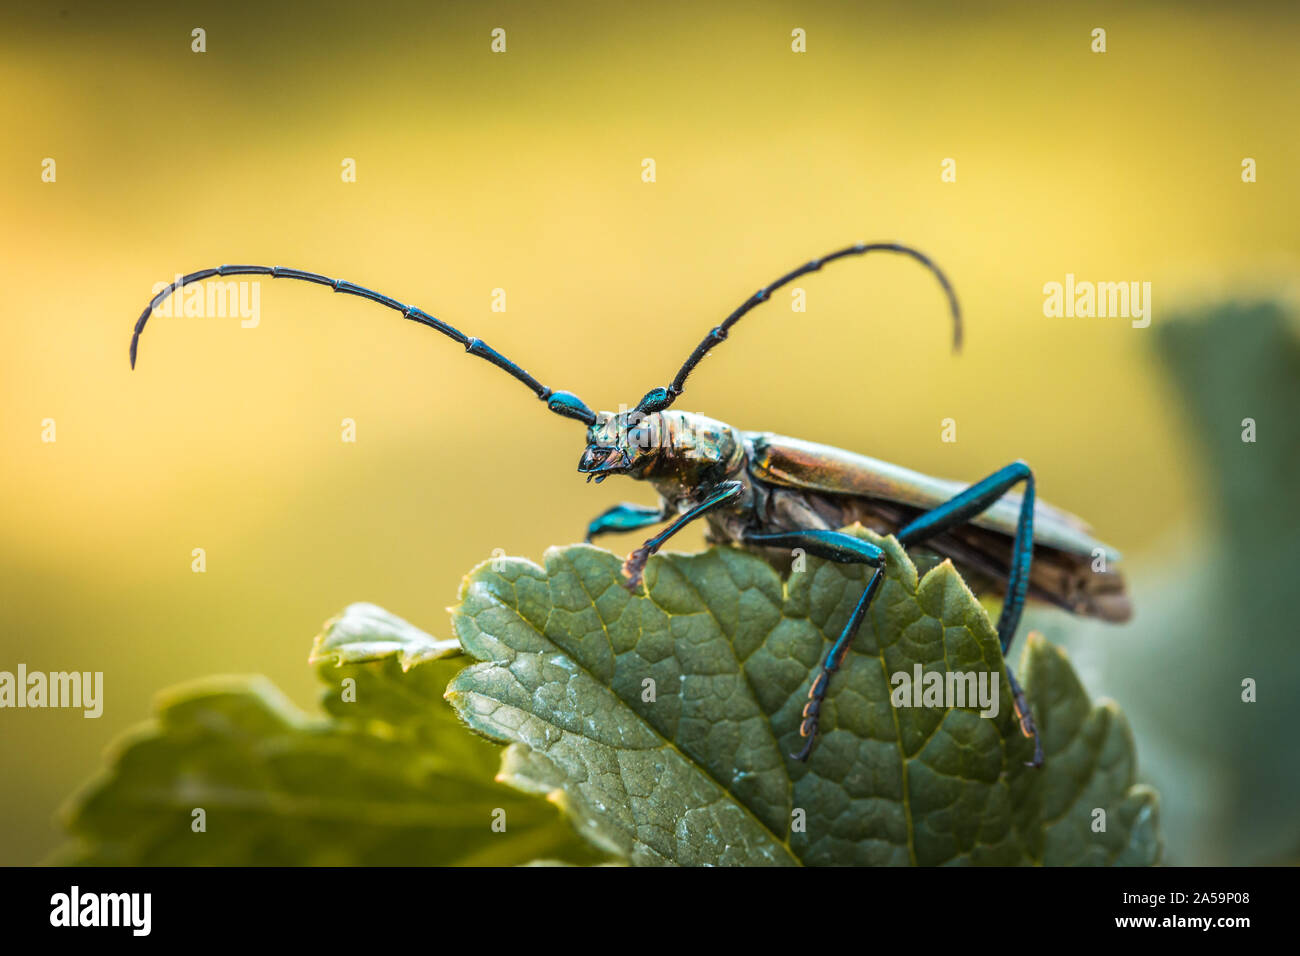 Musk beetle Aromia moschata close-up, Eurasian species of longhorn beetle, climbing on a plant in its natural habitat In summer. Stock Photo